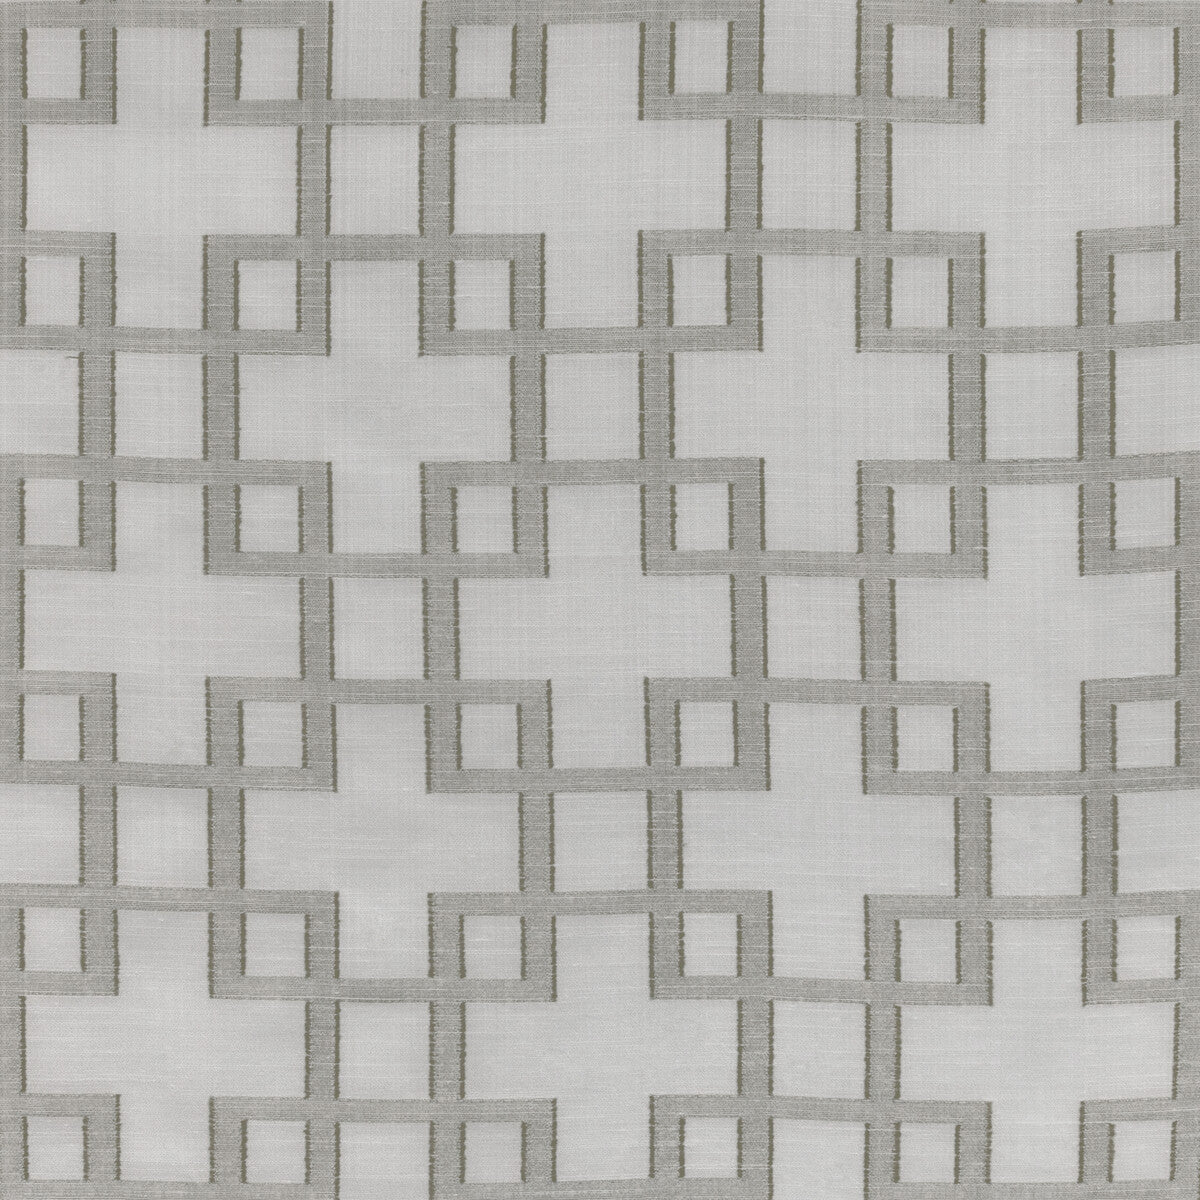 Kravet Contract fabric in 4532-11 color - pattern 4532.11.0 - by Kravet Contract